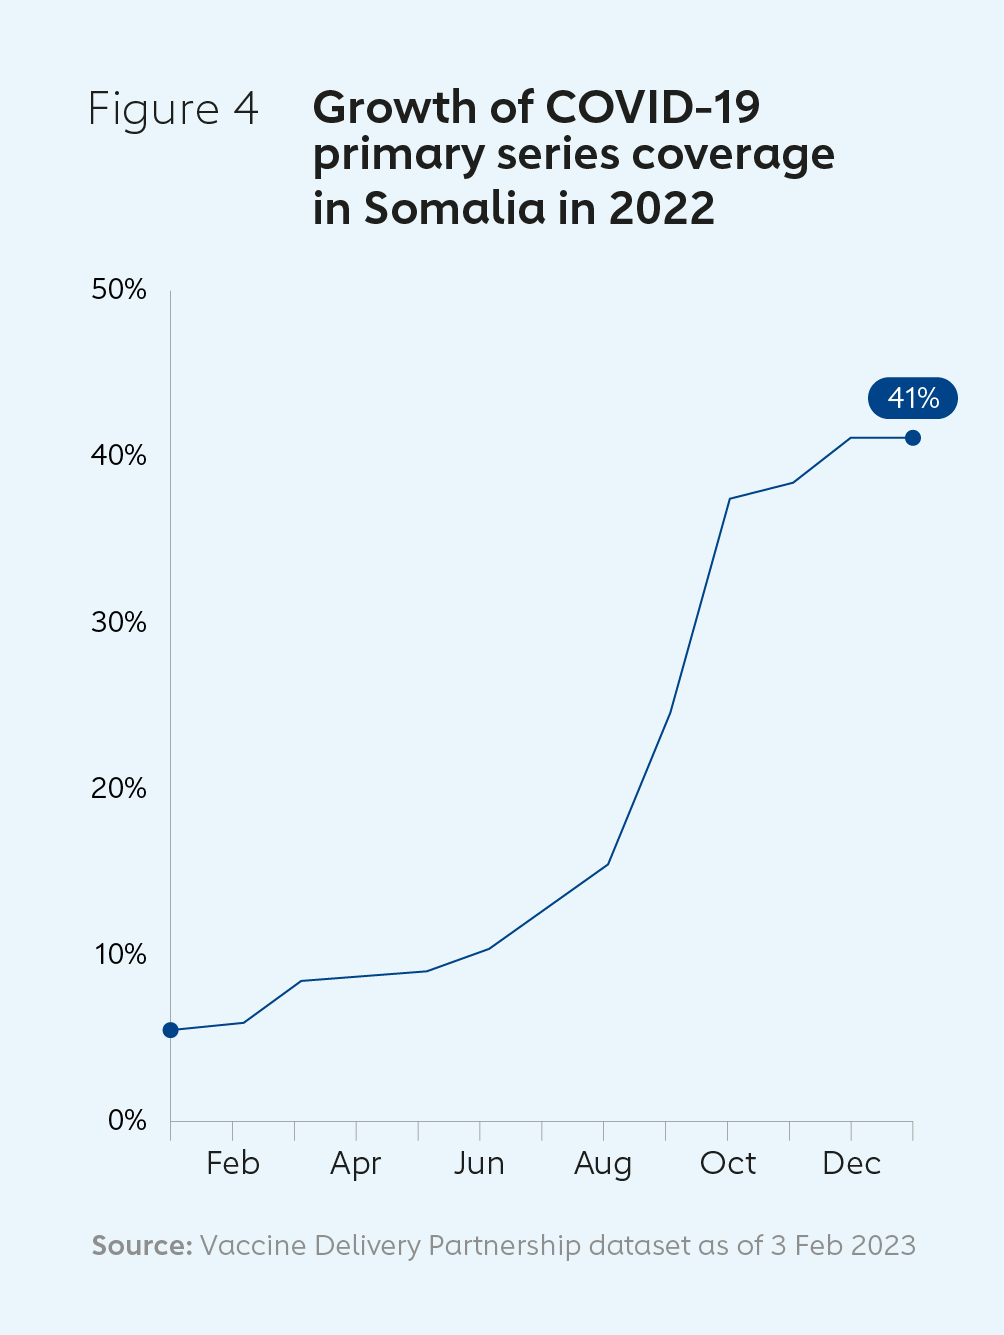 Growth of COVID-19 primary series coverage in Somalia in 2022